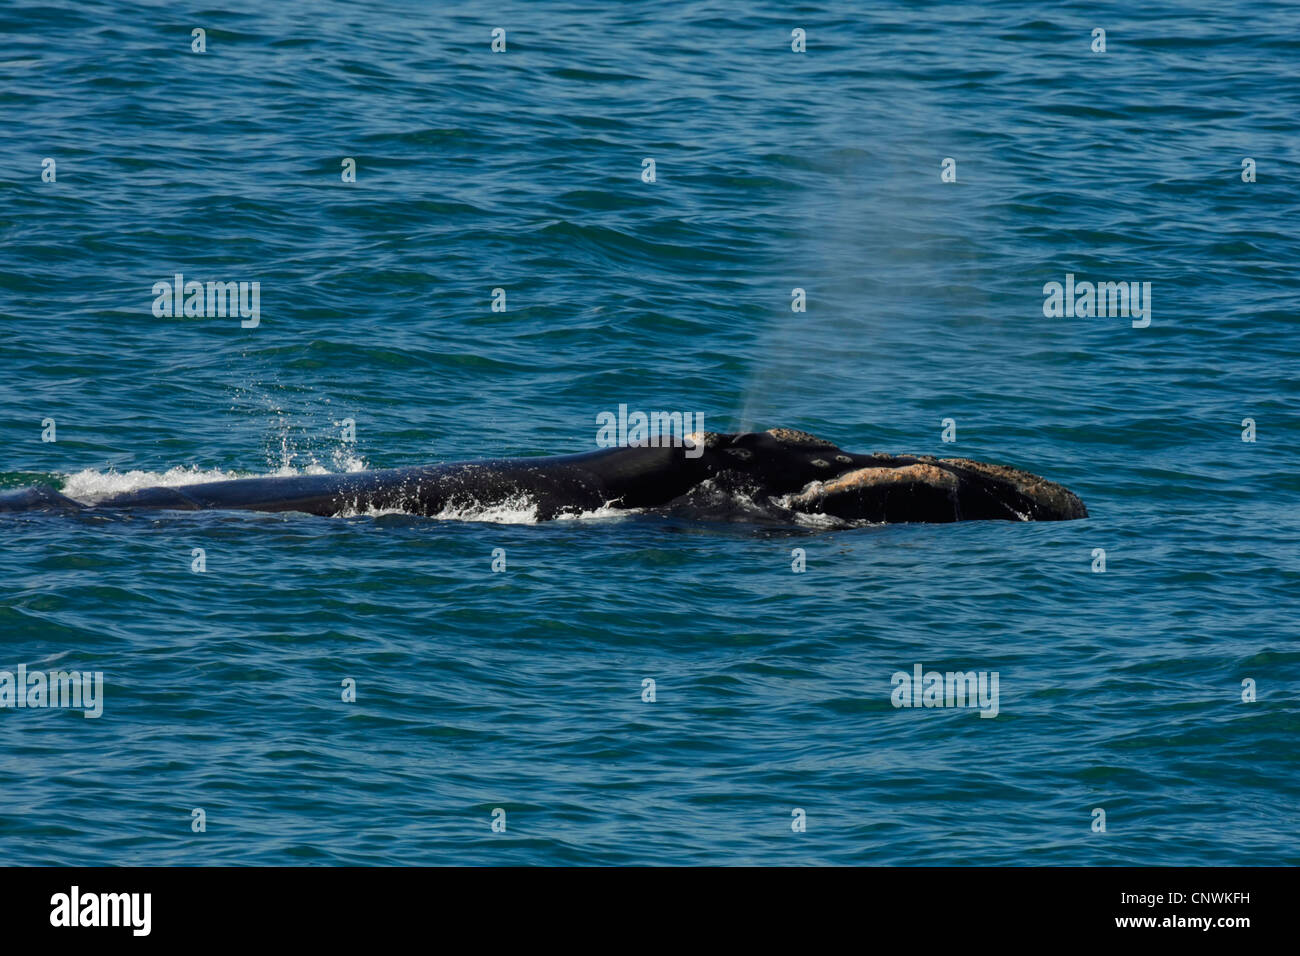 southern right whale (Eubalaena australis, Balaena glacialis australis), swimming at the water surface expelling blow, South Africa, Western Cape Stock Photo